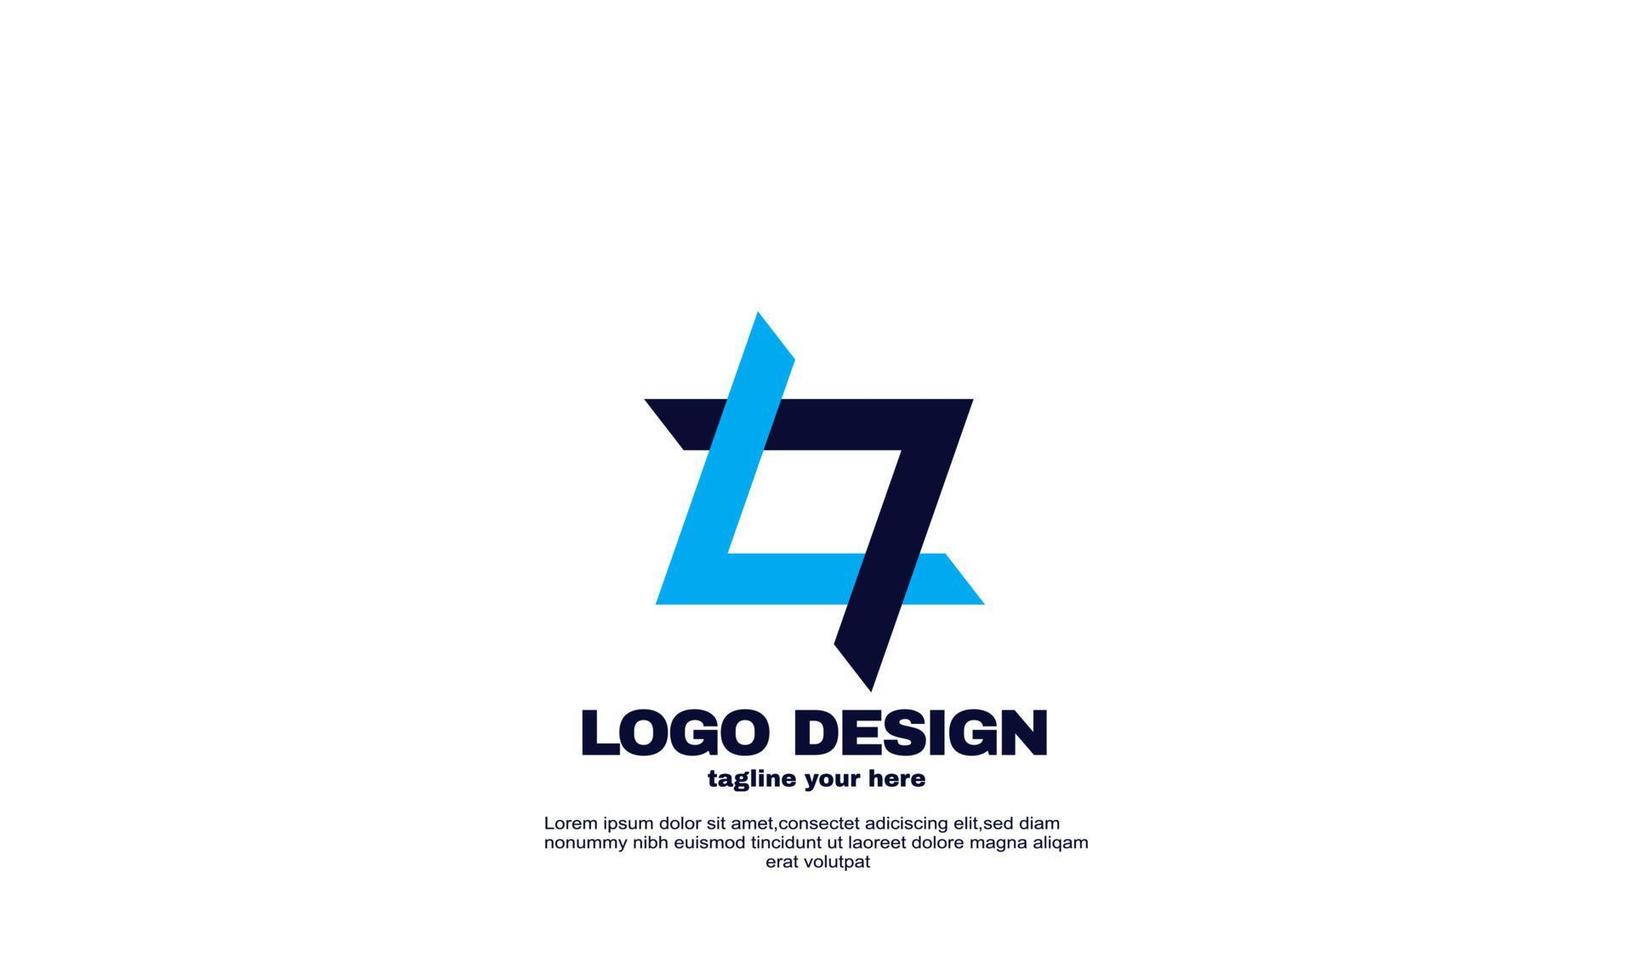 awesome Modern networking logo company business and branding design vector